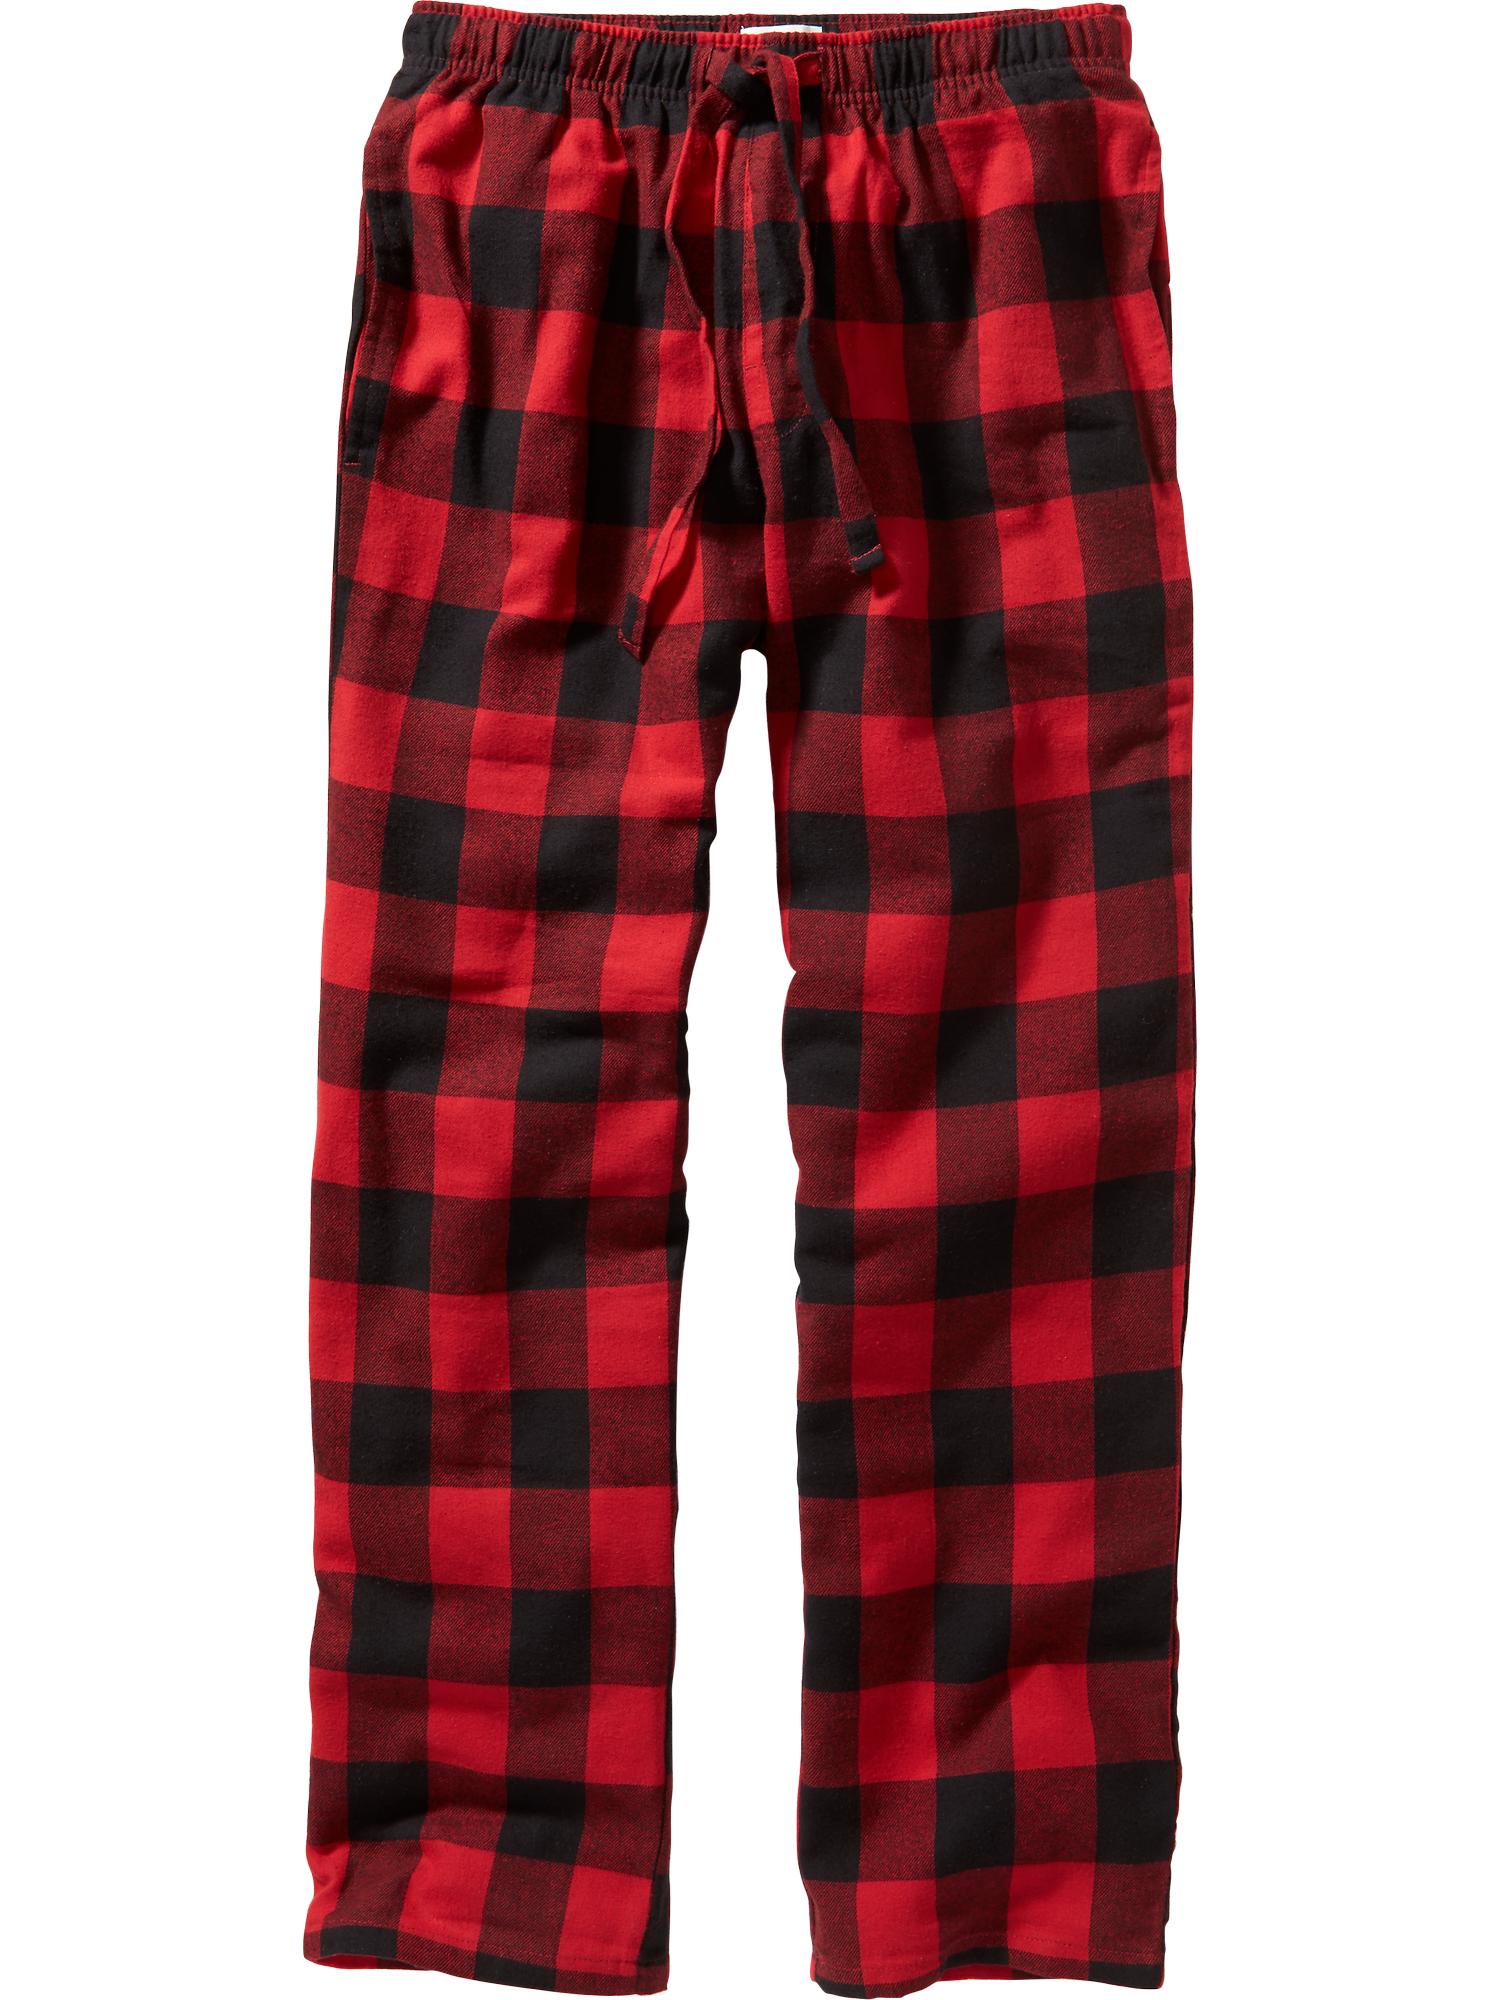 NWT: Men’s Old Navy Plaid Flannel Pajama Pants, Red/Black, Size XL